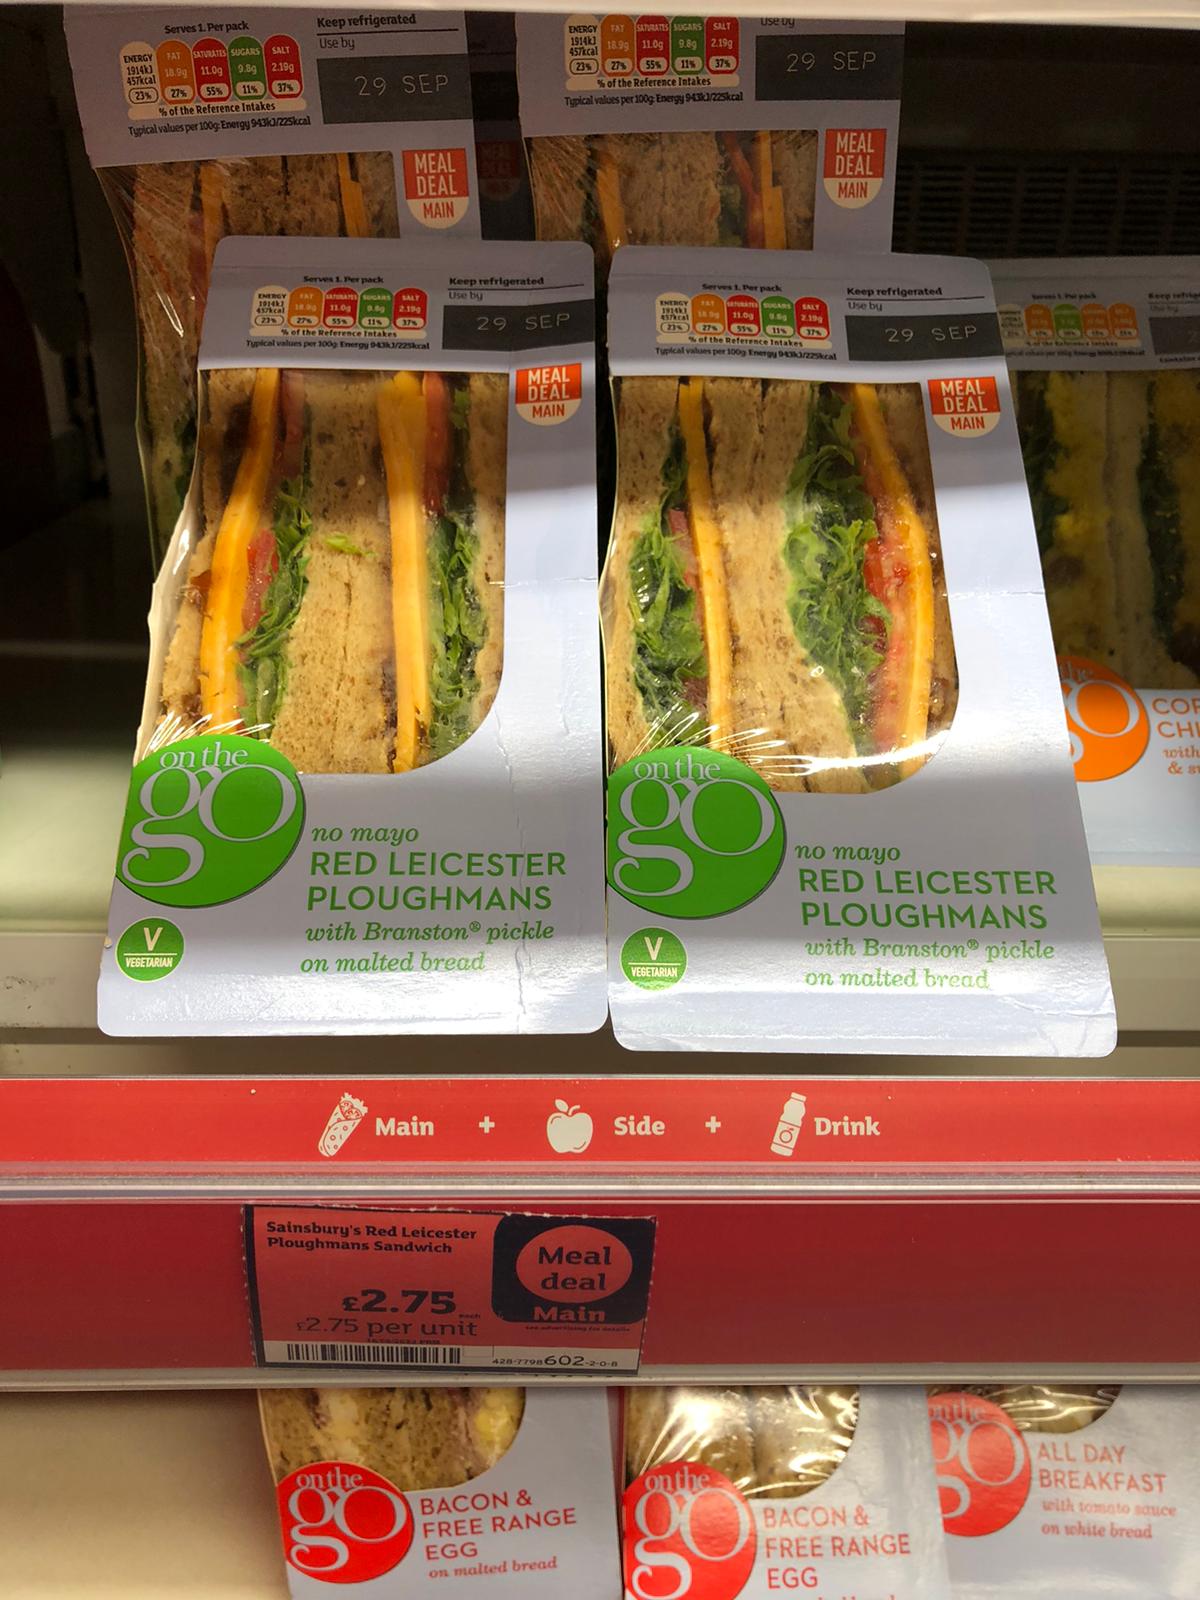 Sainsbury’s cheese ploughman’s costs ?2.75 or ?5 as part of a meal deal at its Moorgate branch